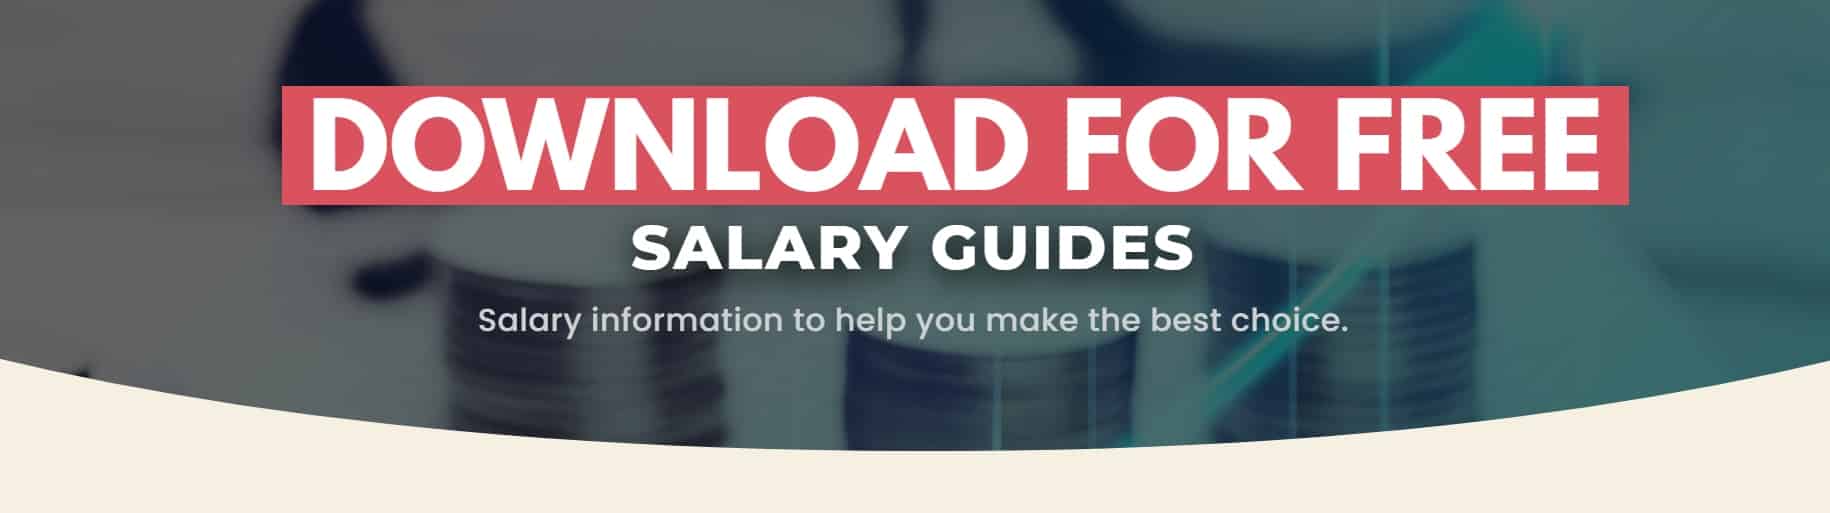 Opti Salary Guide Banner Salary Guides for 2022 1 1 1